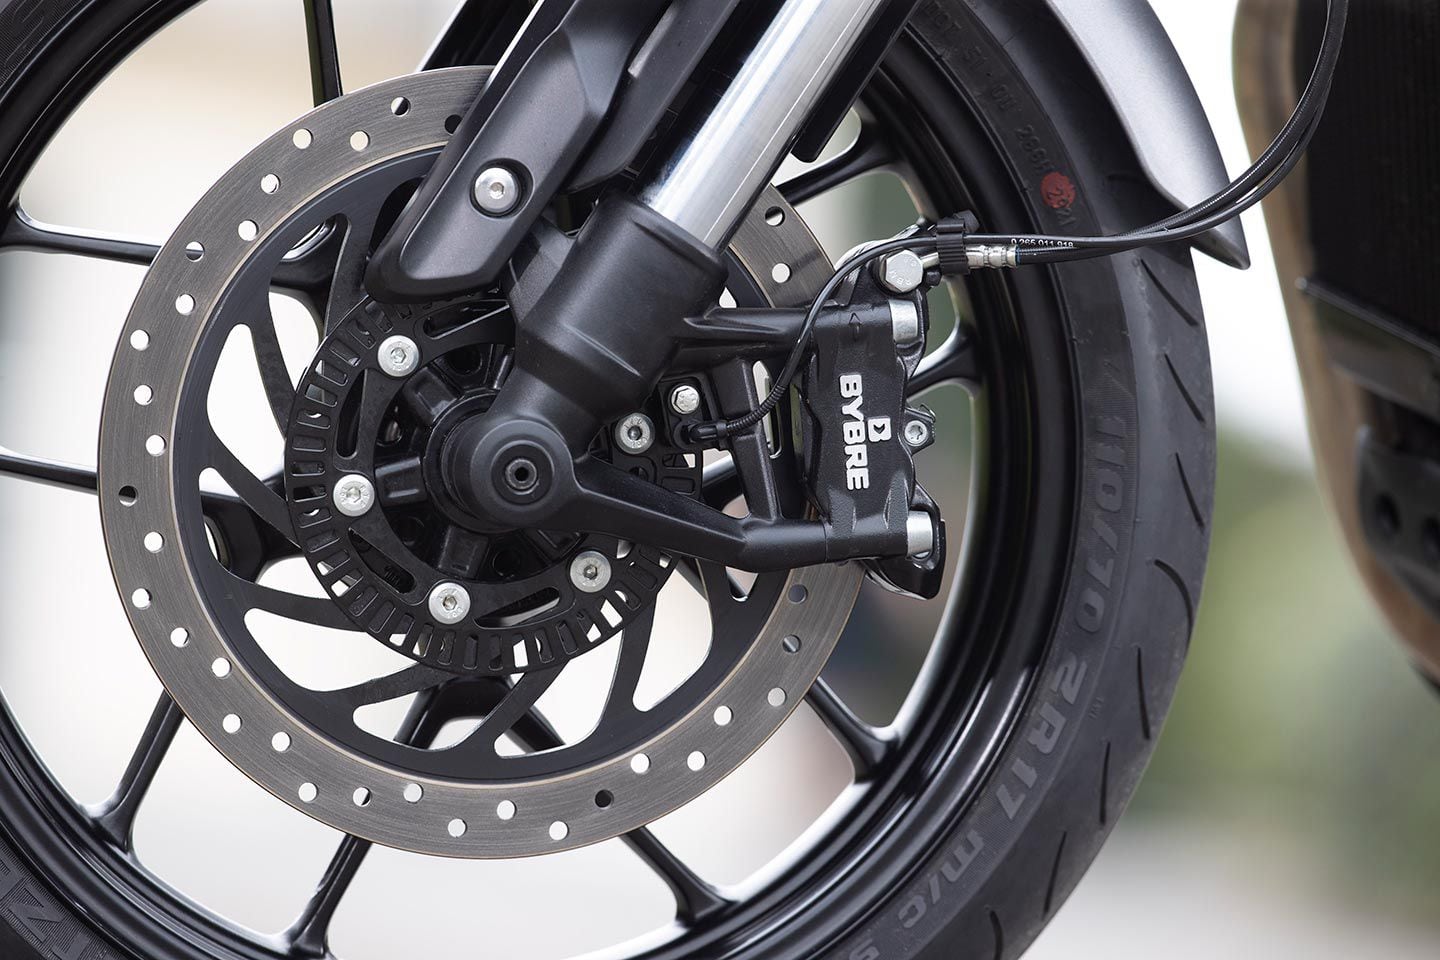 A single 300m brake disc and ByBre radial caliper handle braking duty at the front of the Speed 400.